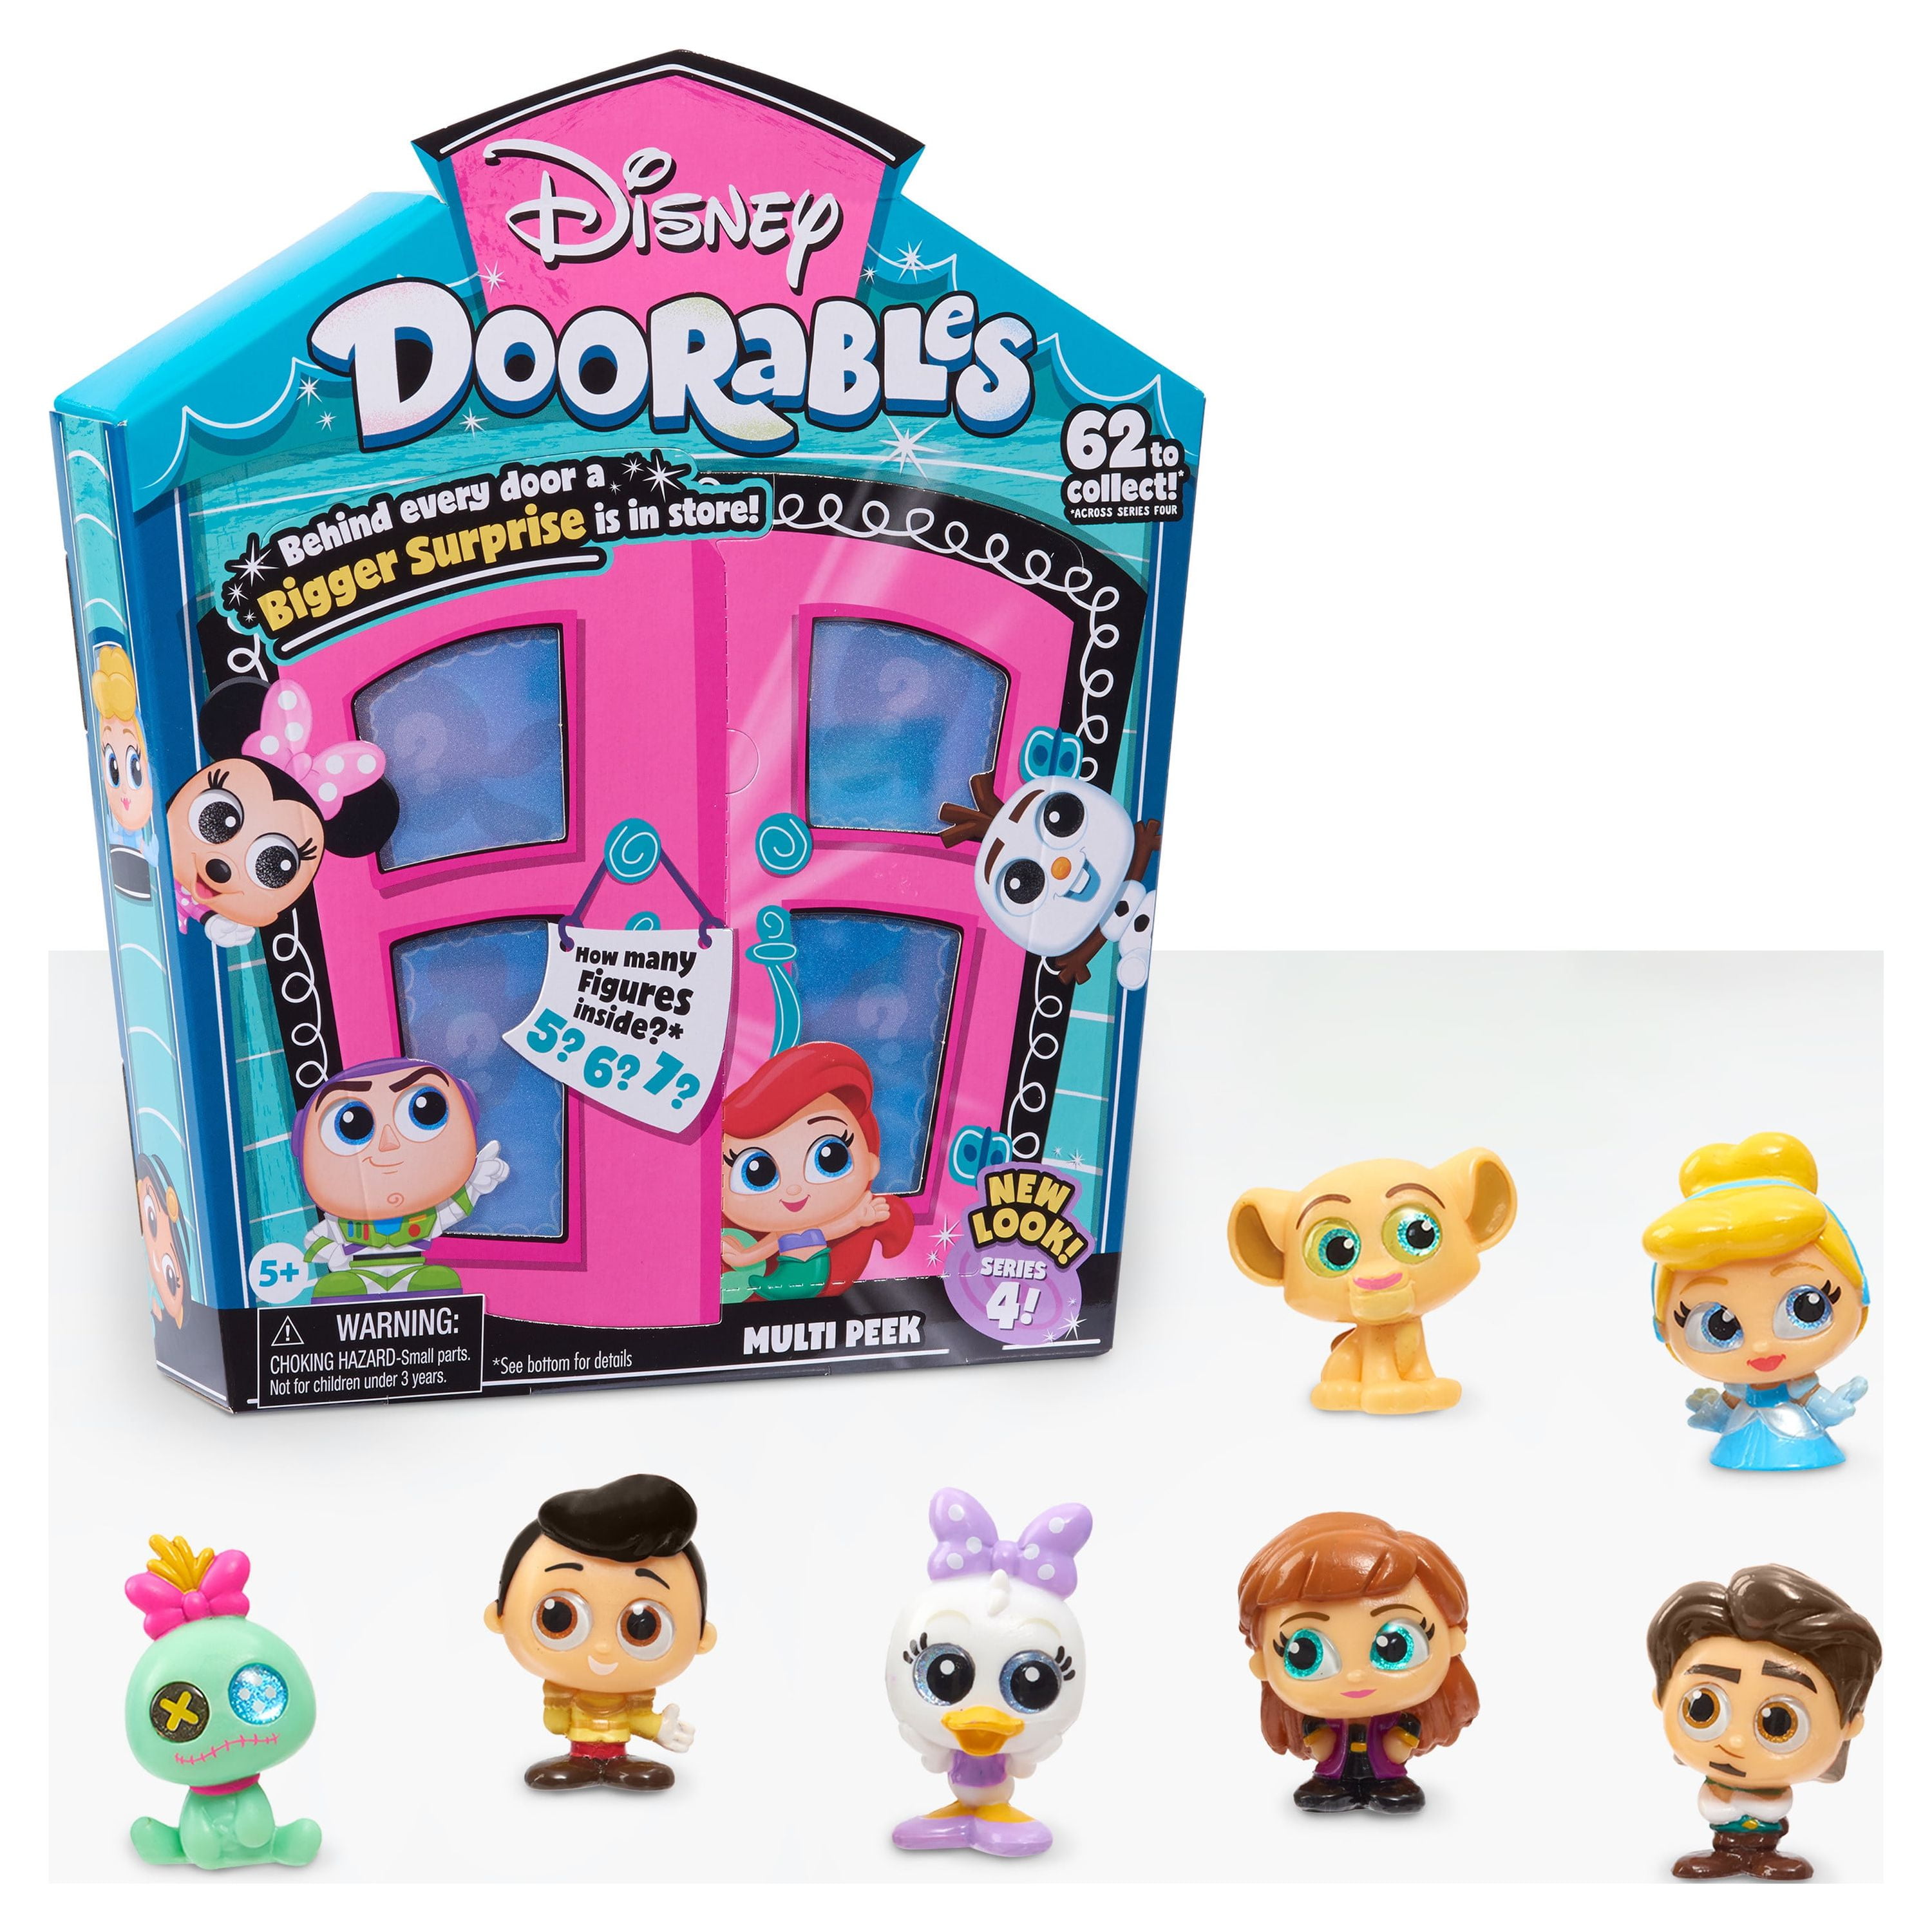 DISNEY DOORABLES STITCH COLLECTION < 3-6 years